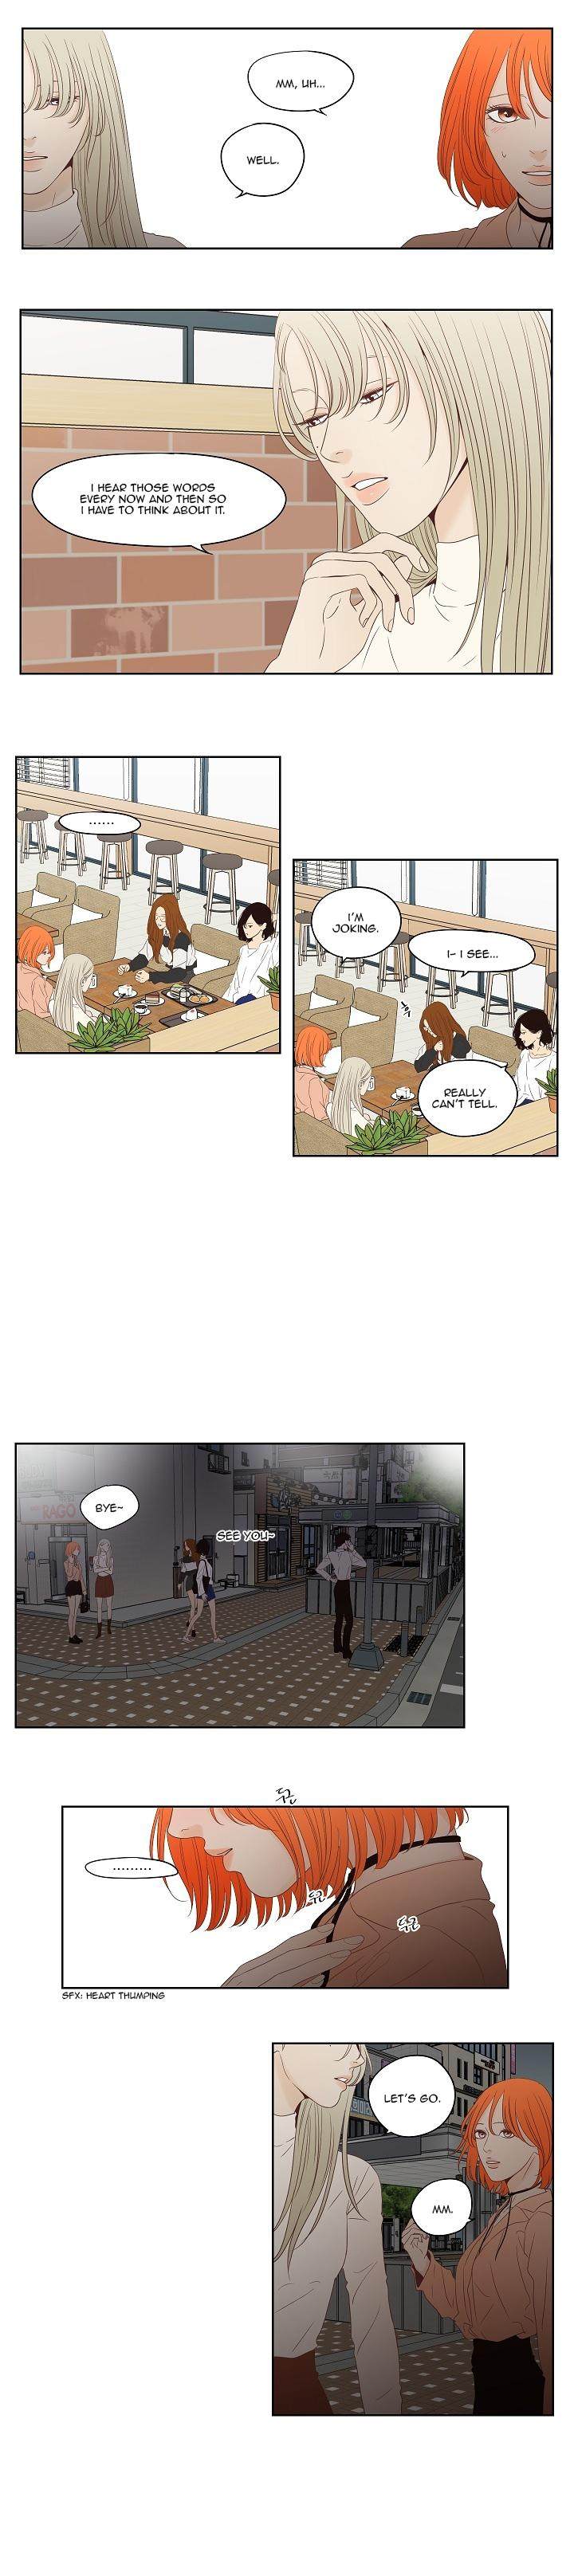 Pet’s Aesthetics - Chapter 8 Page 8